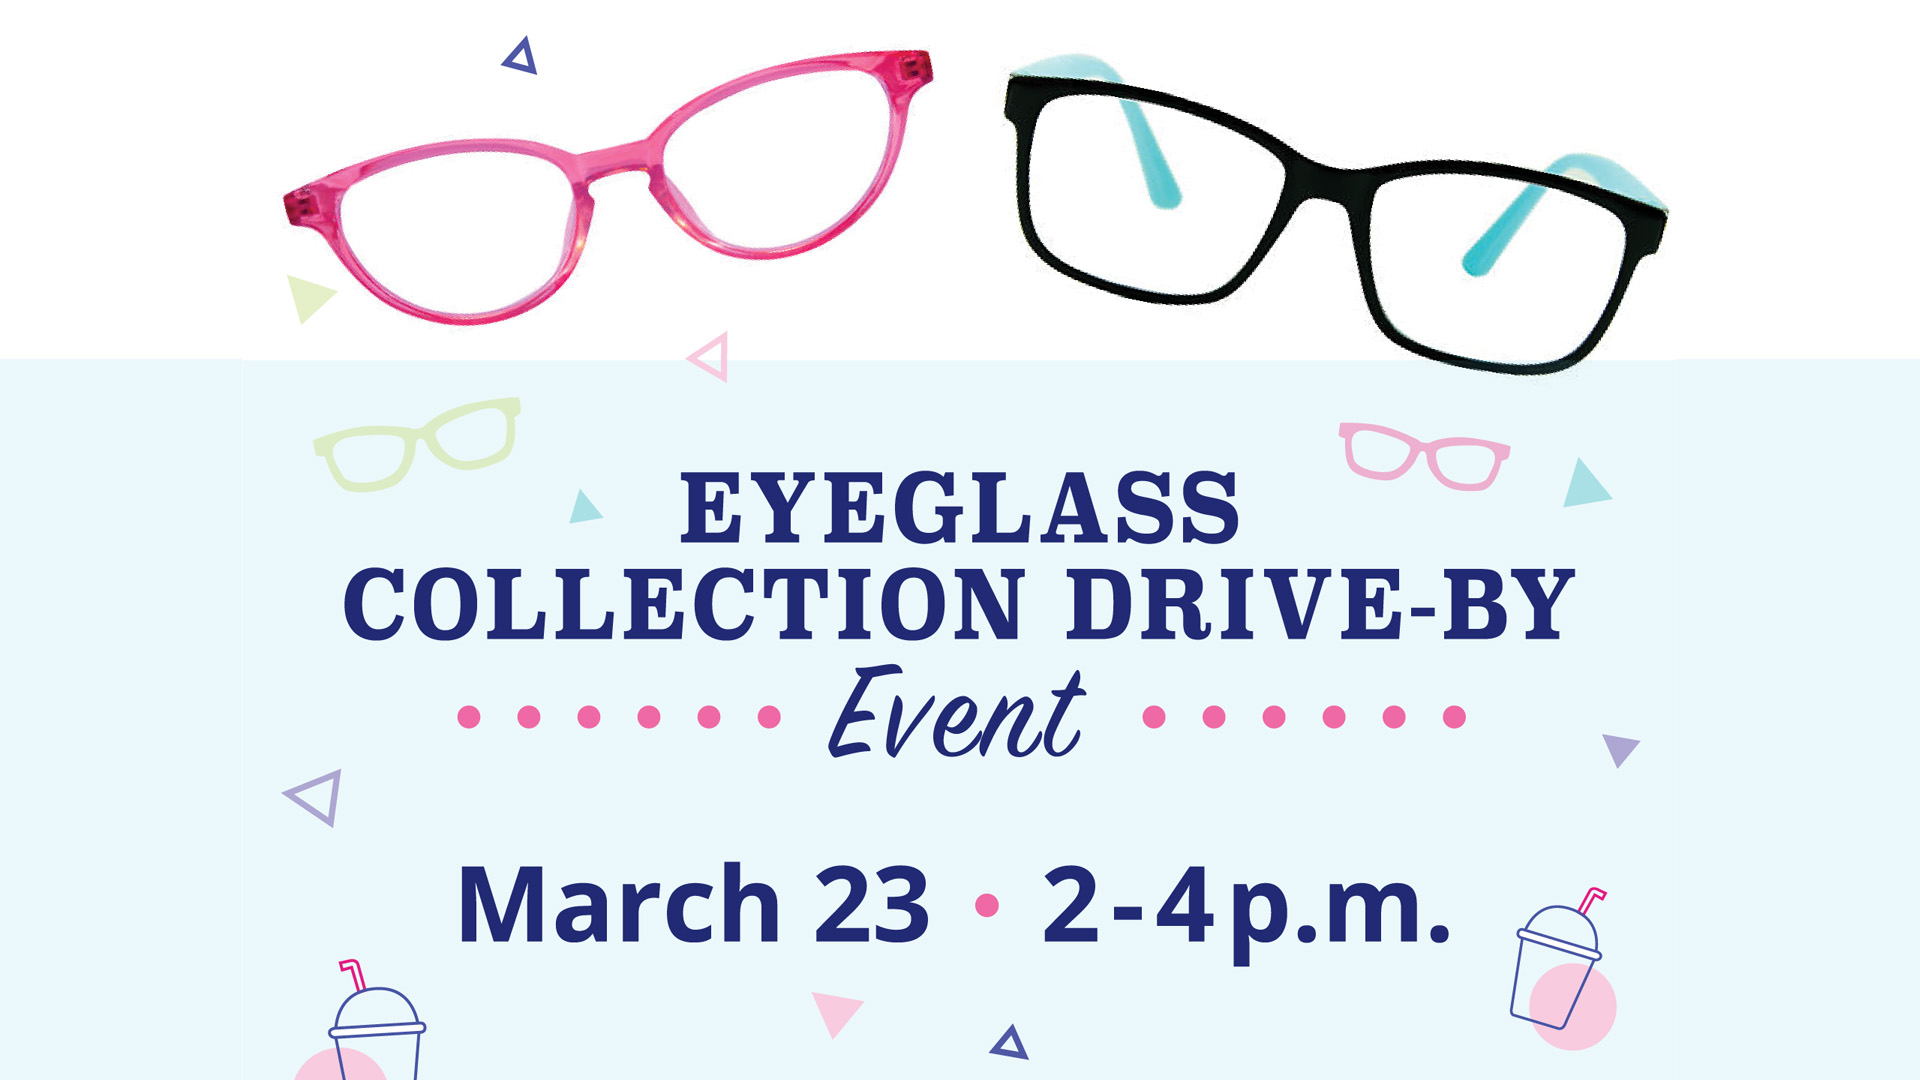 North Central Community Hospice Eyeglass Drive